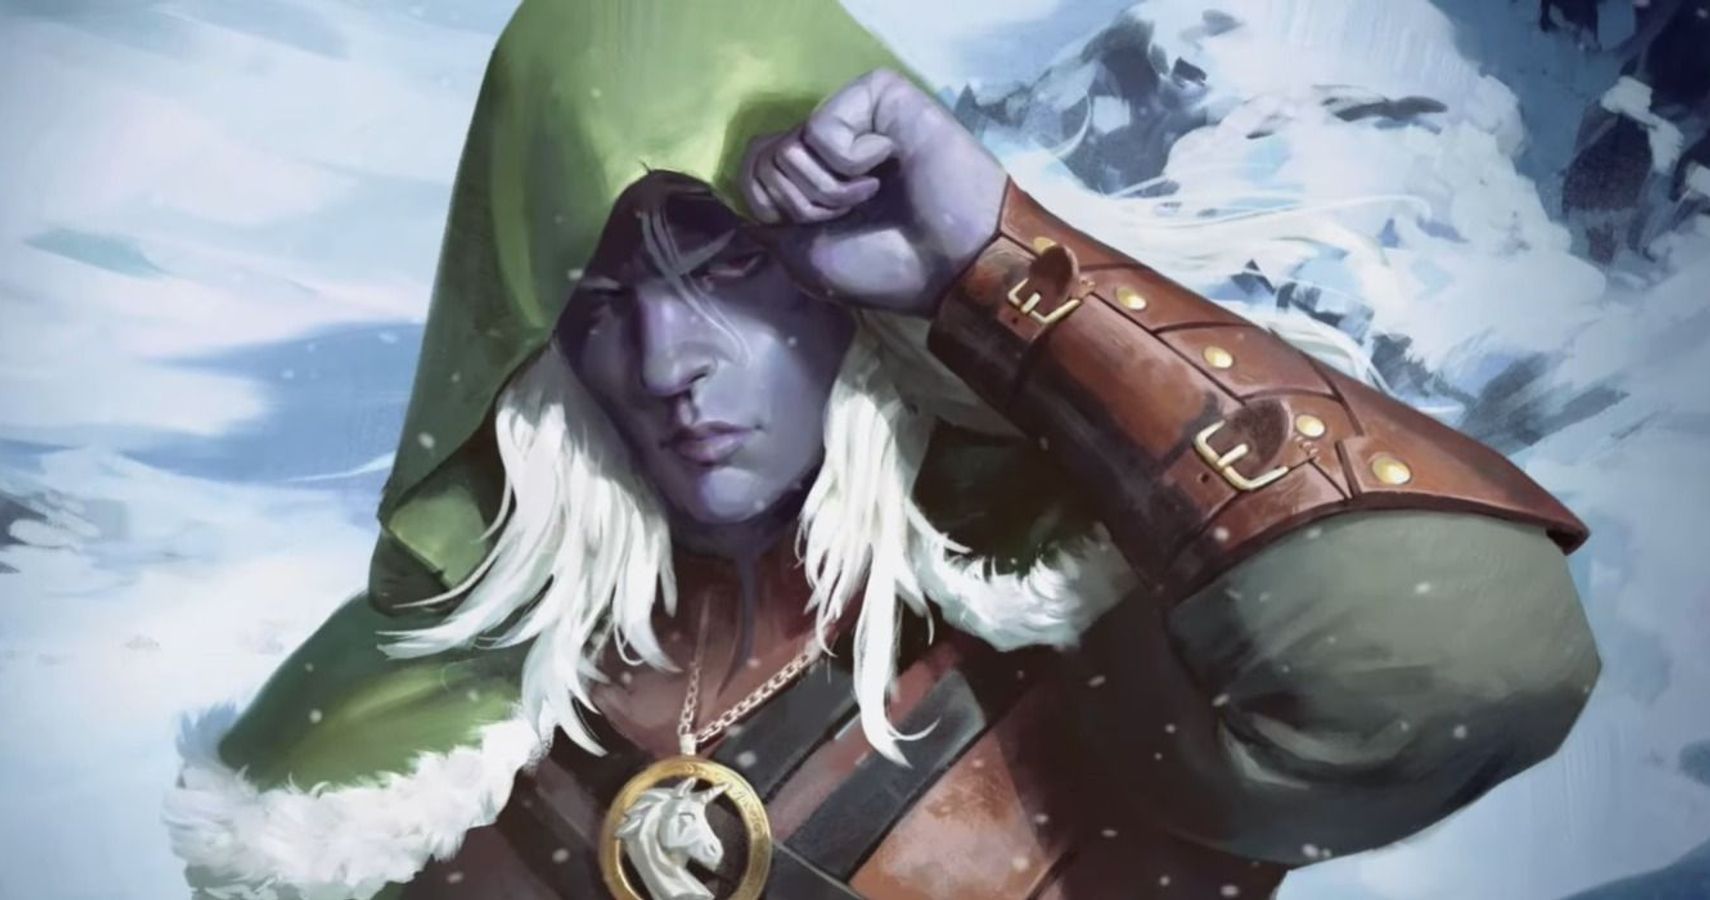 D&D Drizzt in the snow official art